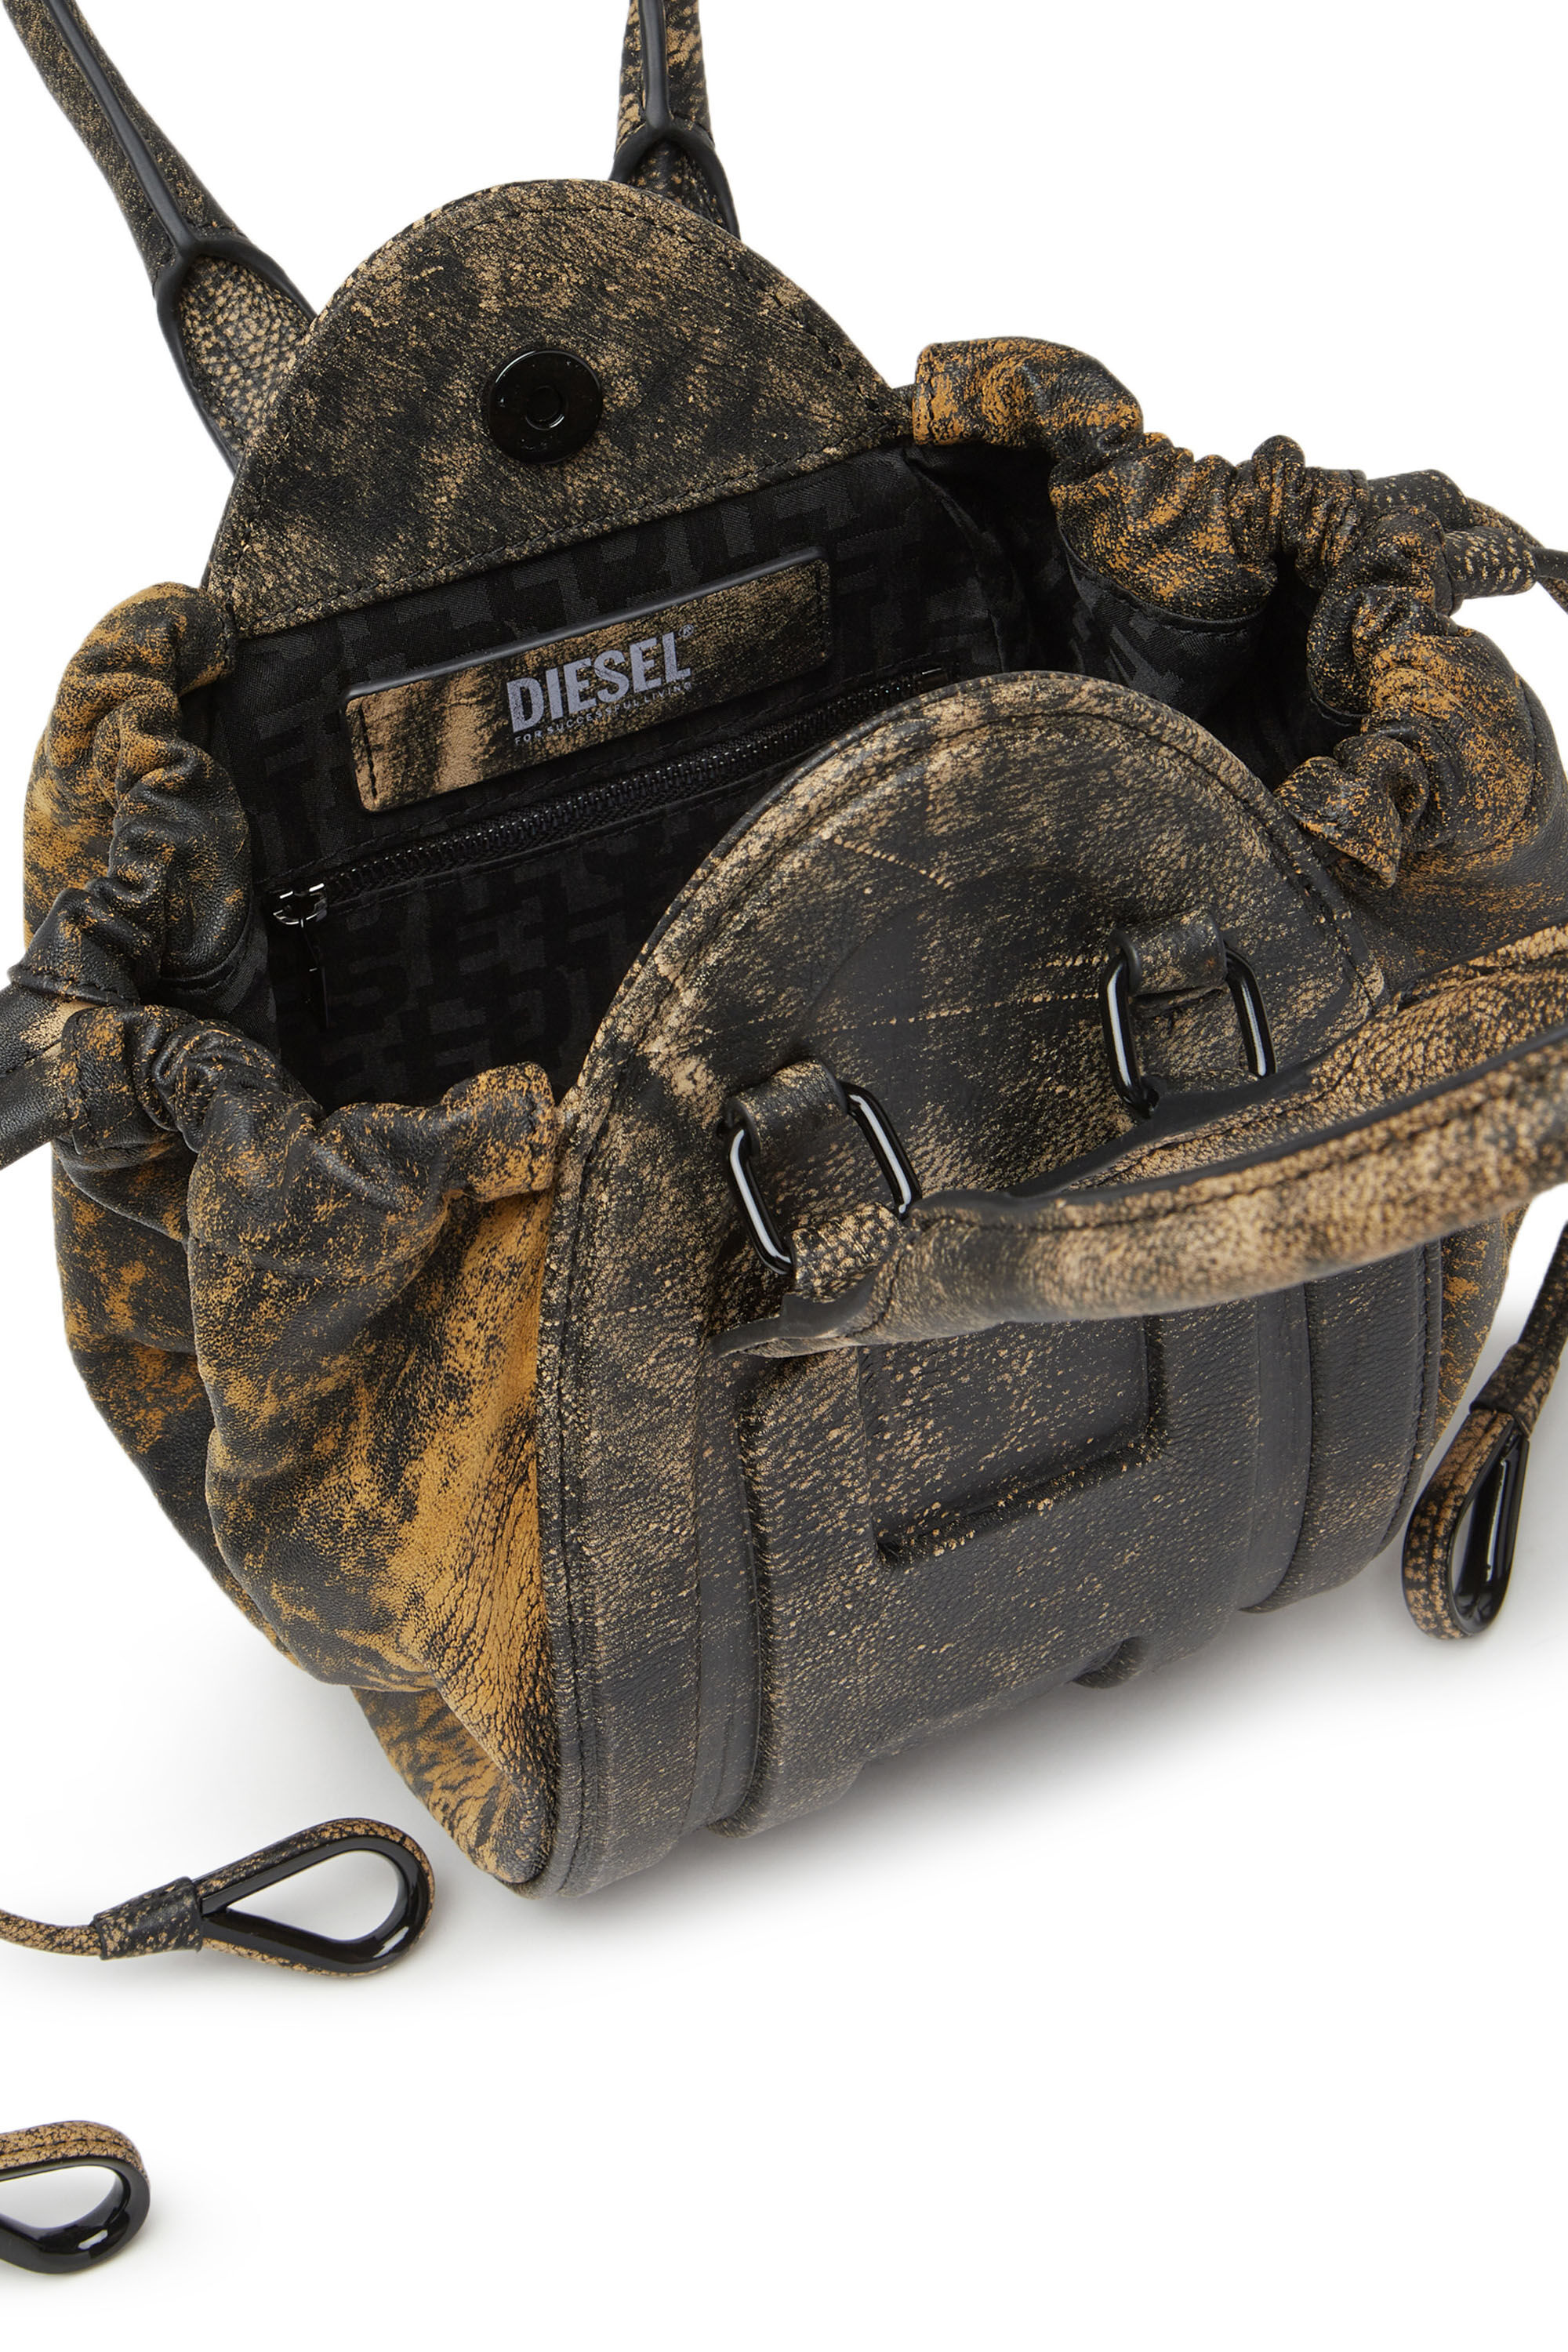 Diesel - 1DR-FOLD XS, Woman 1DR-Fold XS - Oval logo handbag in marbled leather in Brown - Image 2